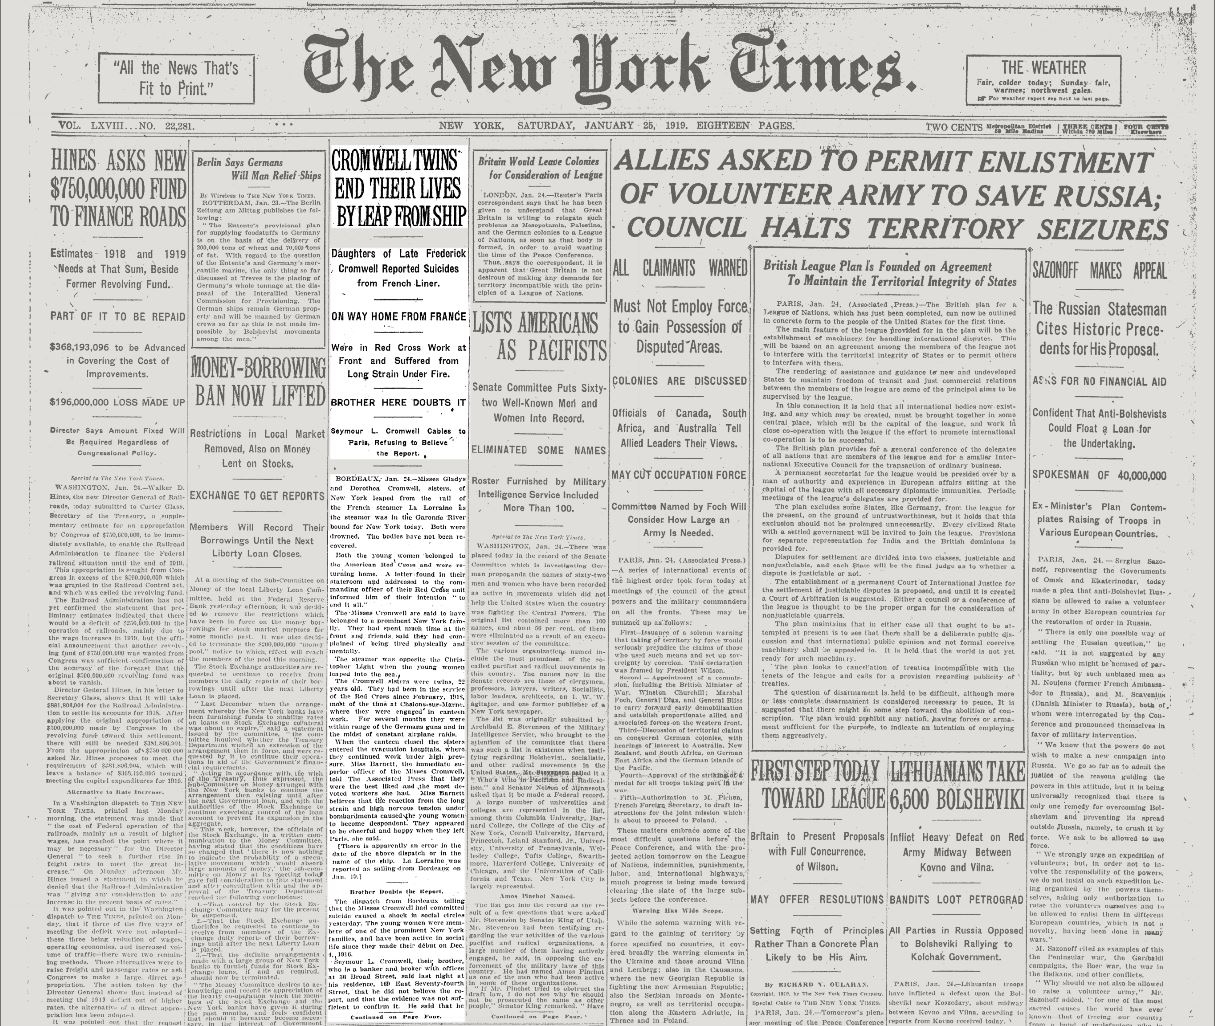 New York Times cover from Jan. 25, 1919